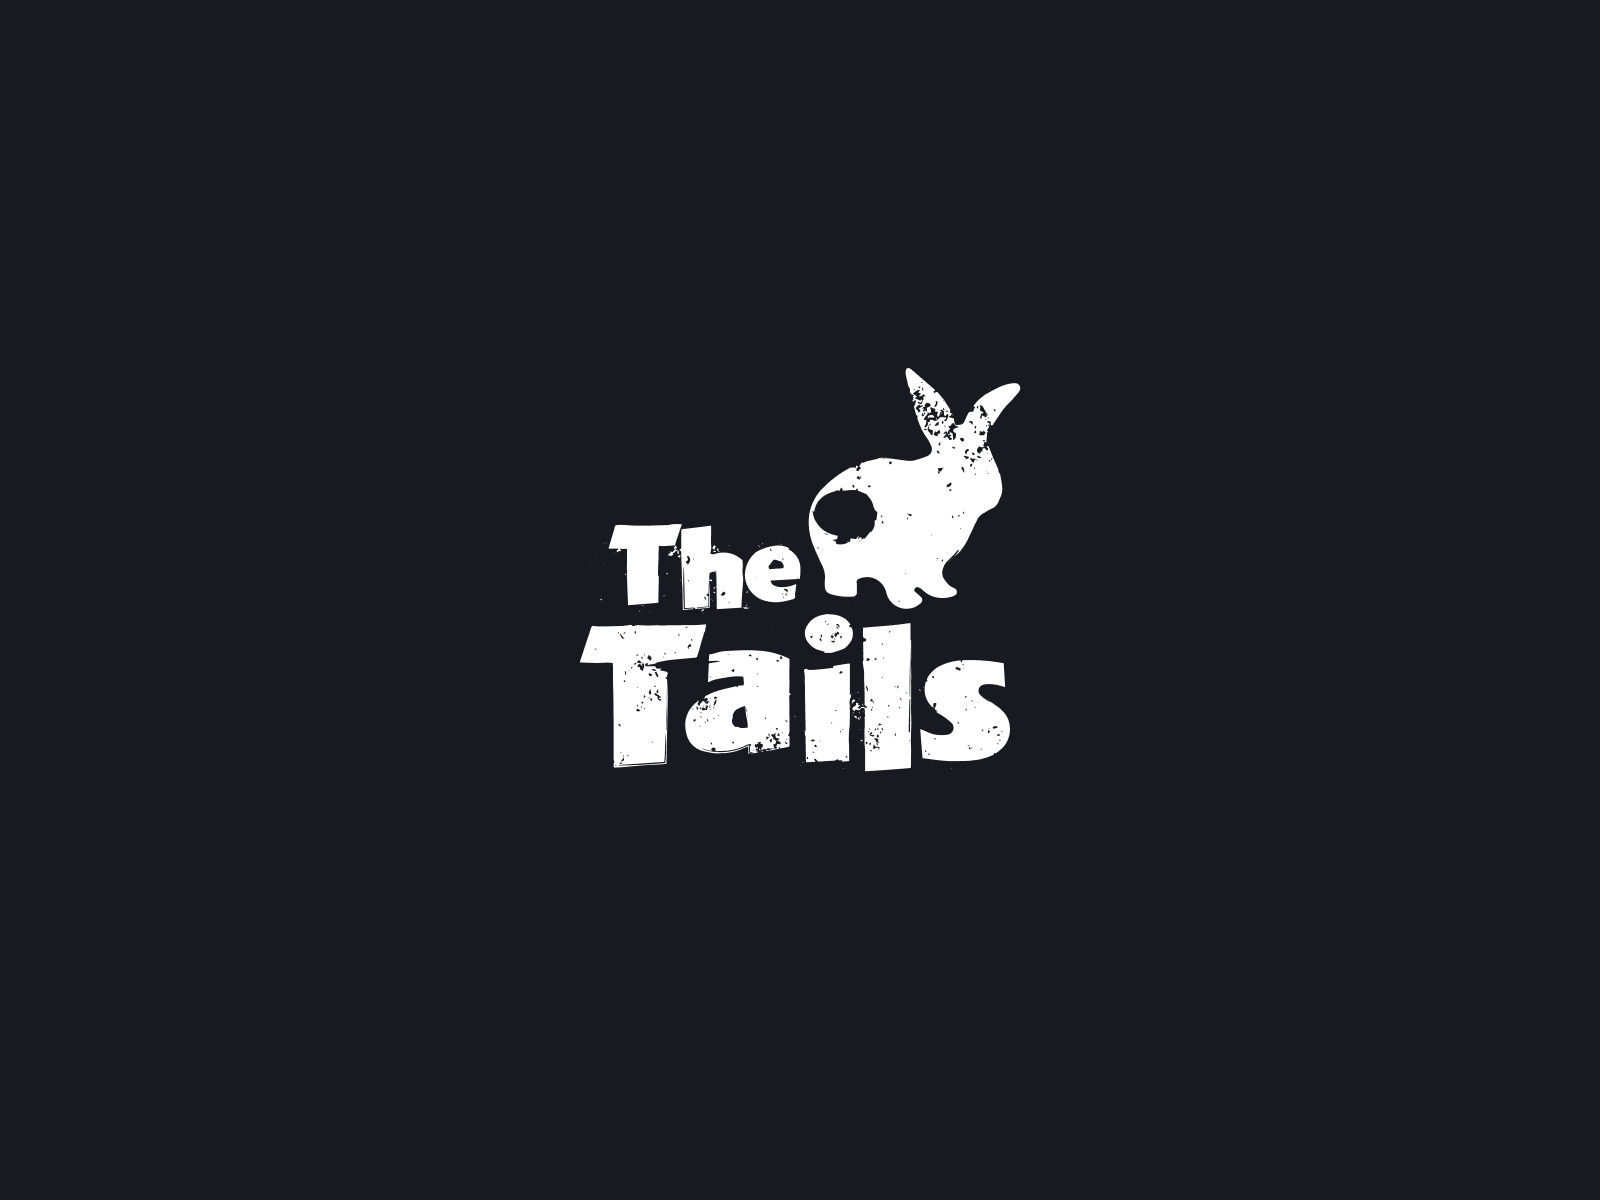 The Tails - Punk Band Logo by Jakub Hoffmann on Dribbble